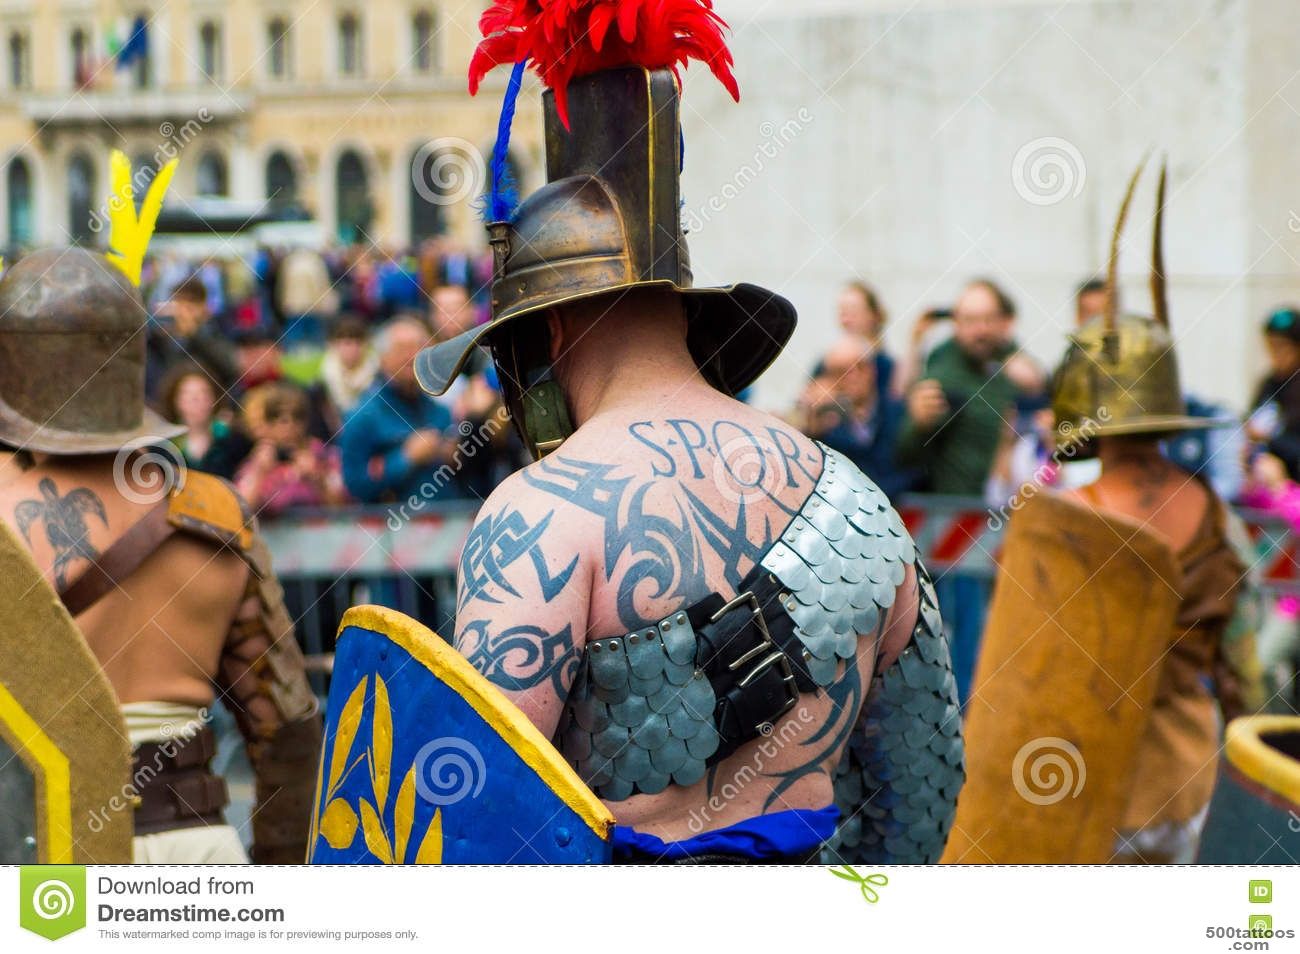 Spqr Tattoo On Man Dressed As Roman Soldier During A March In Rome ..._38